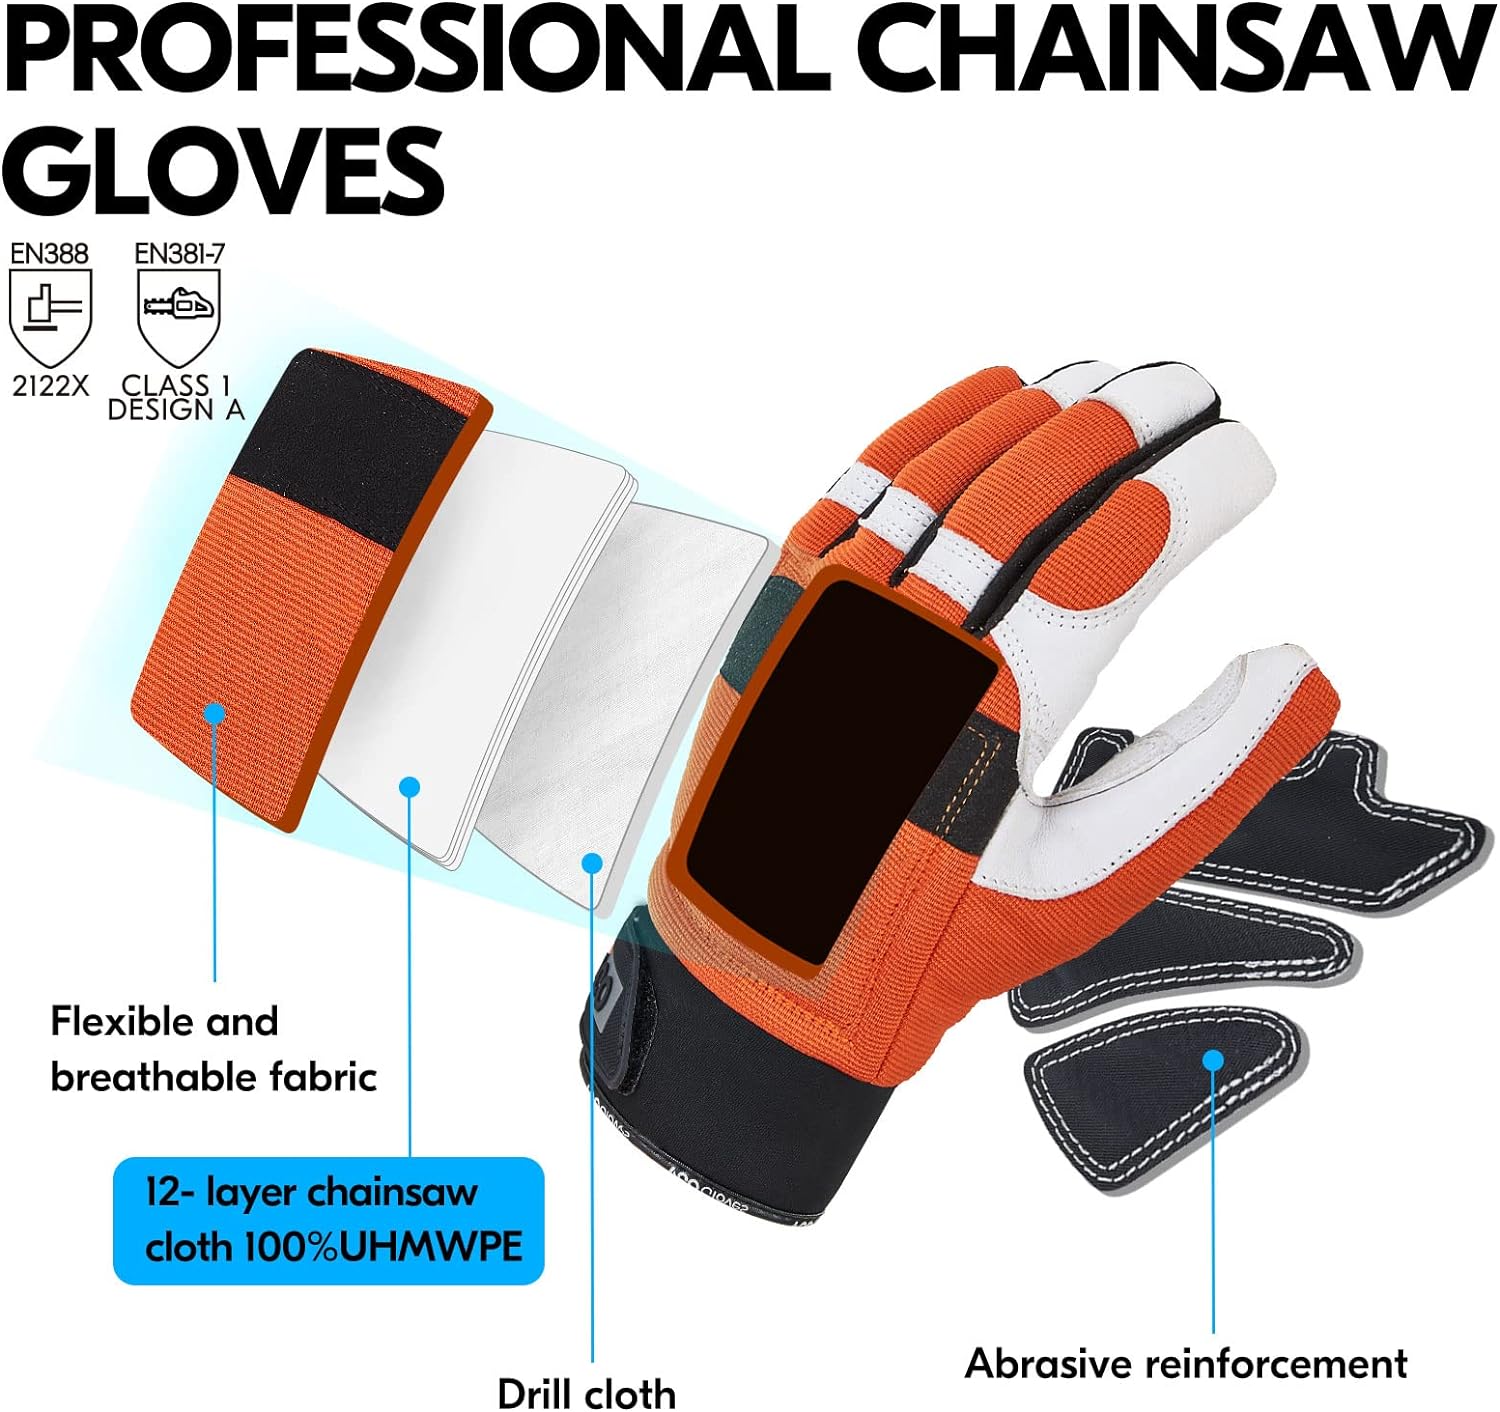 Vgo Chainsaw Work Gloves Saw Protection Review